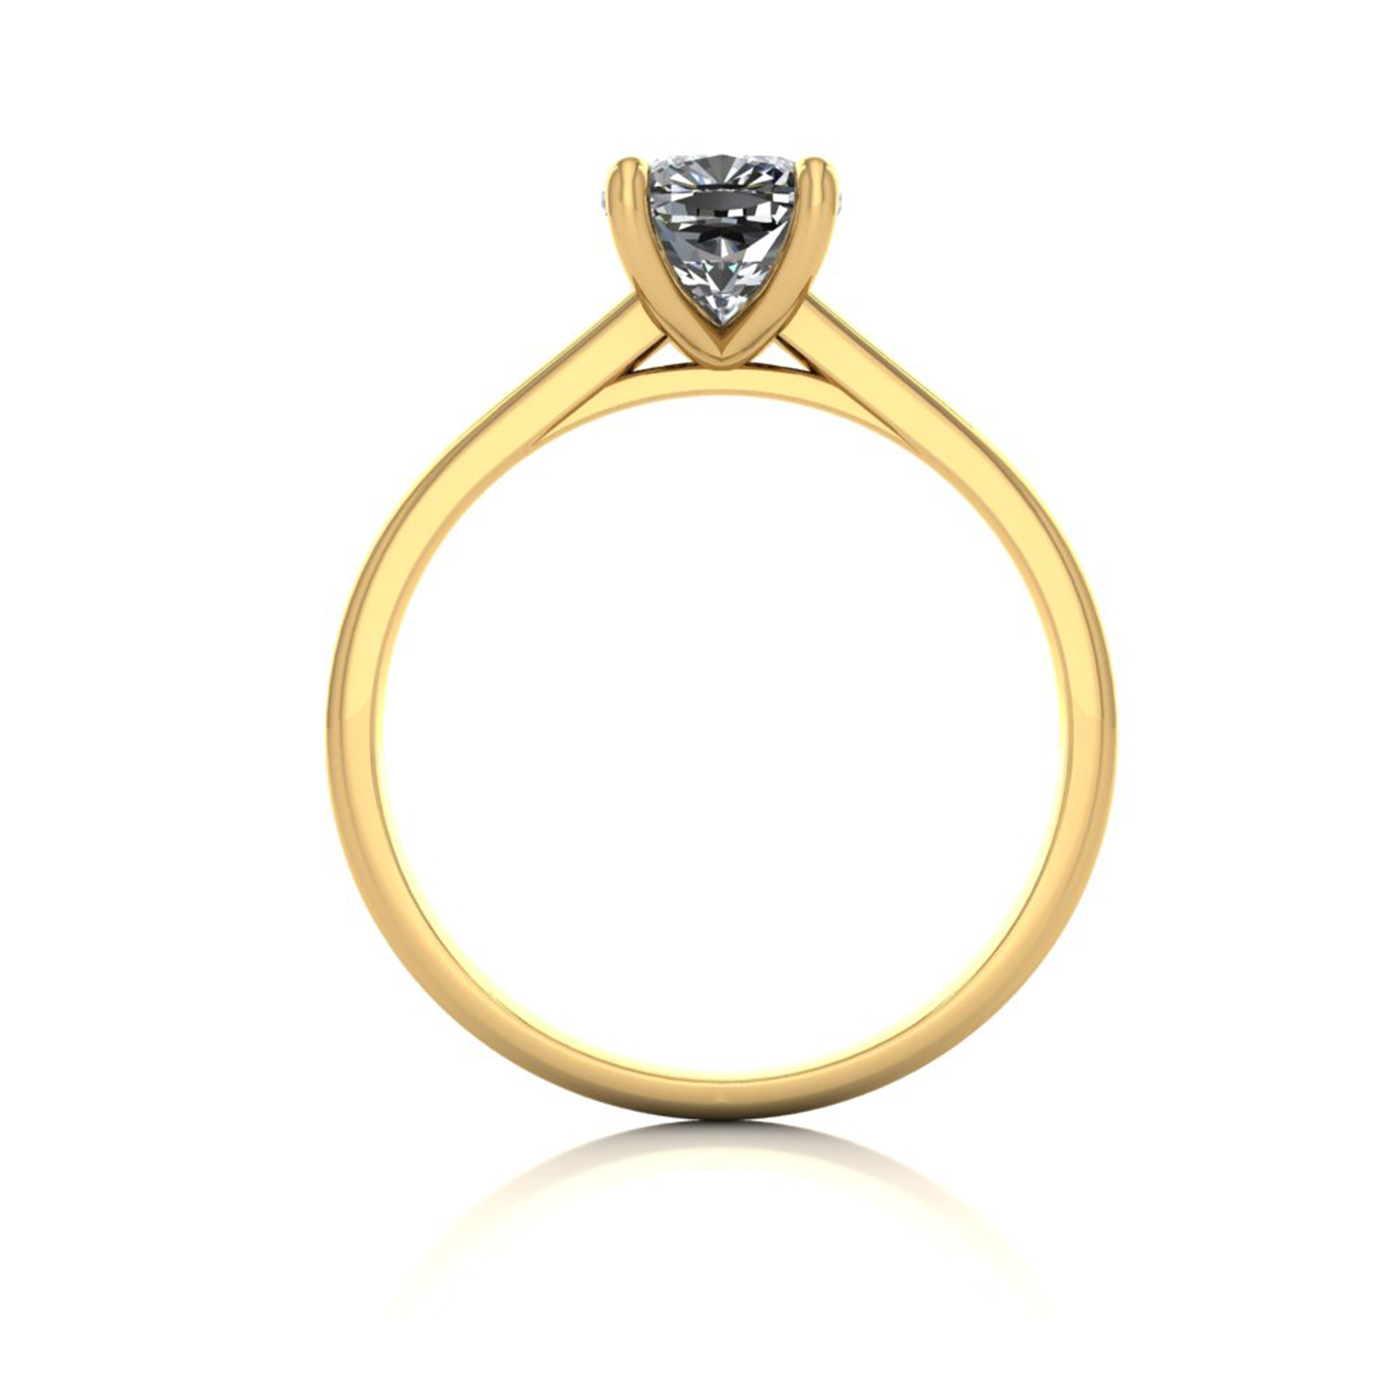 18k yellow gold 1.2ct 4 prongs solitaire cushion cut diamond engagement ring with whisper thin band